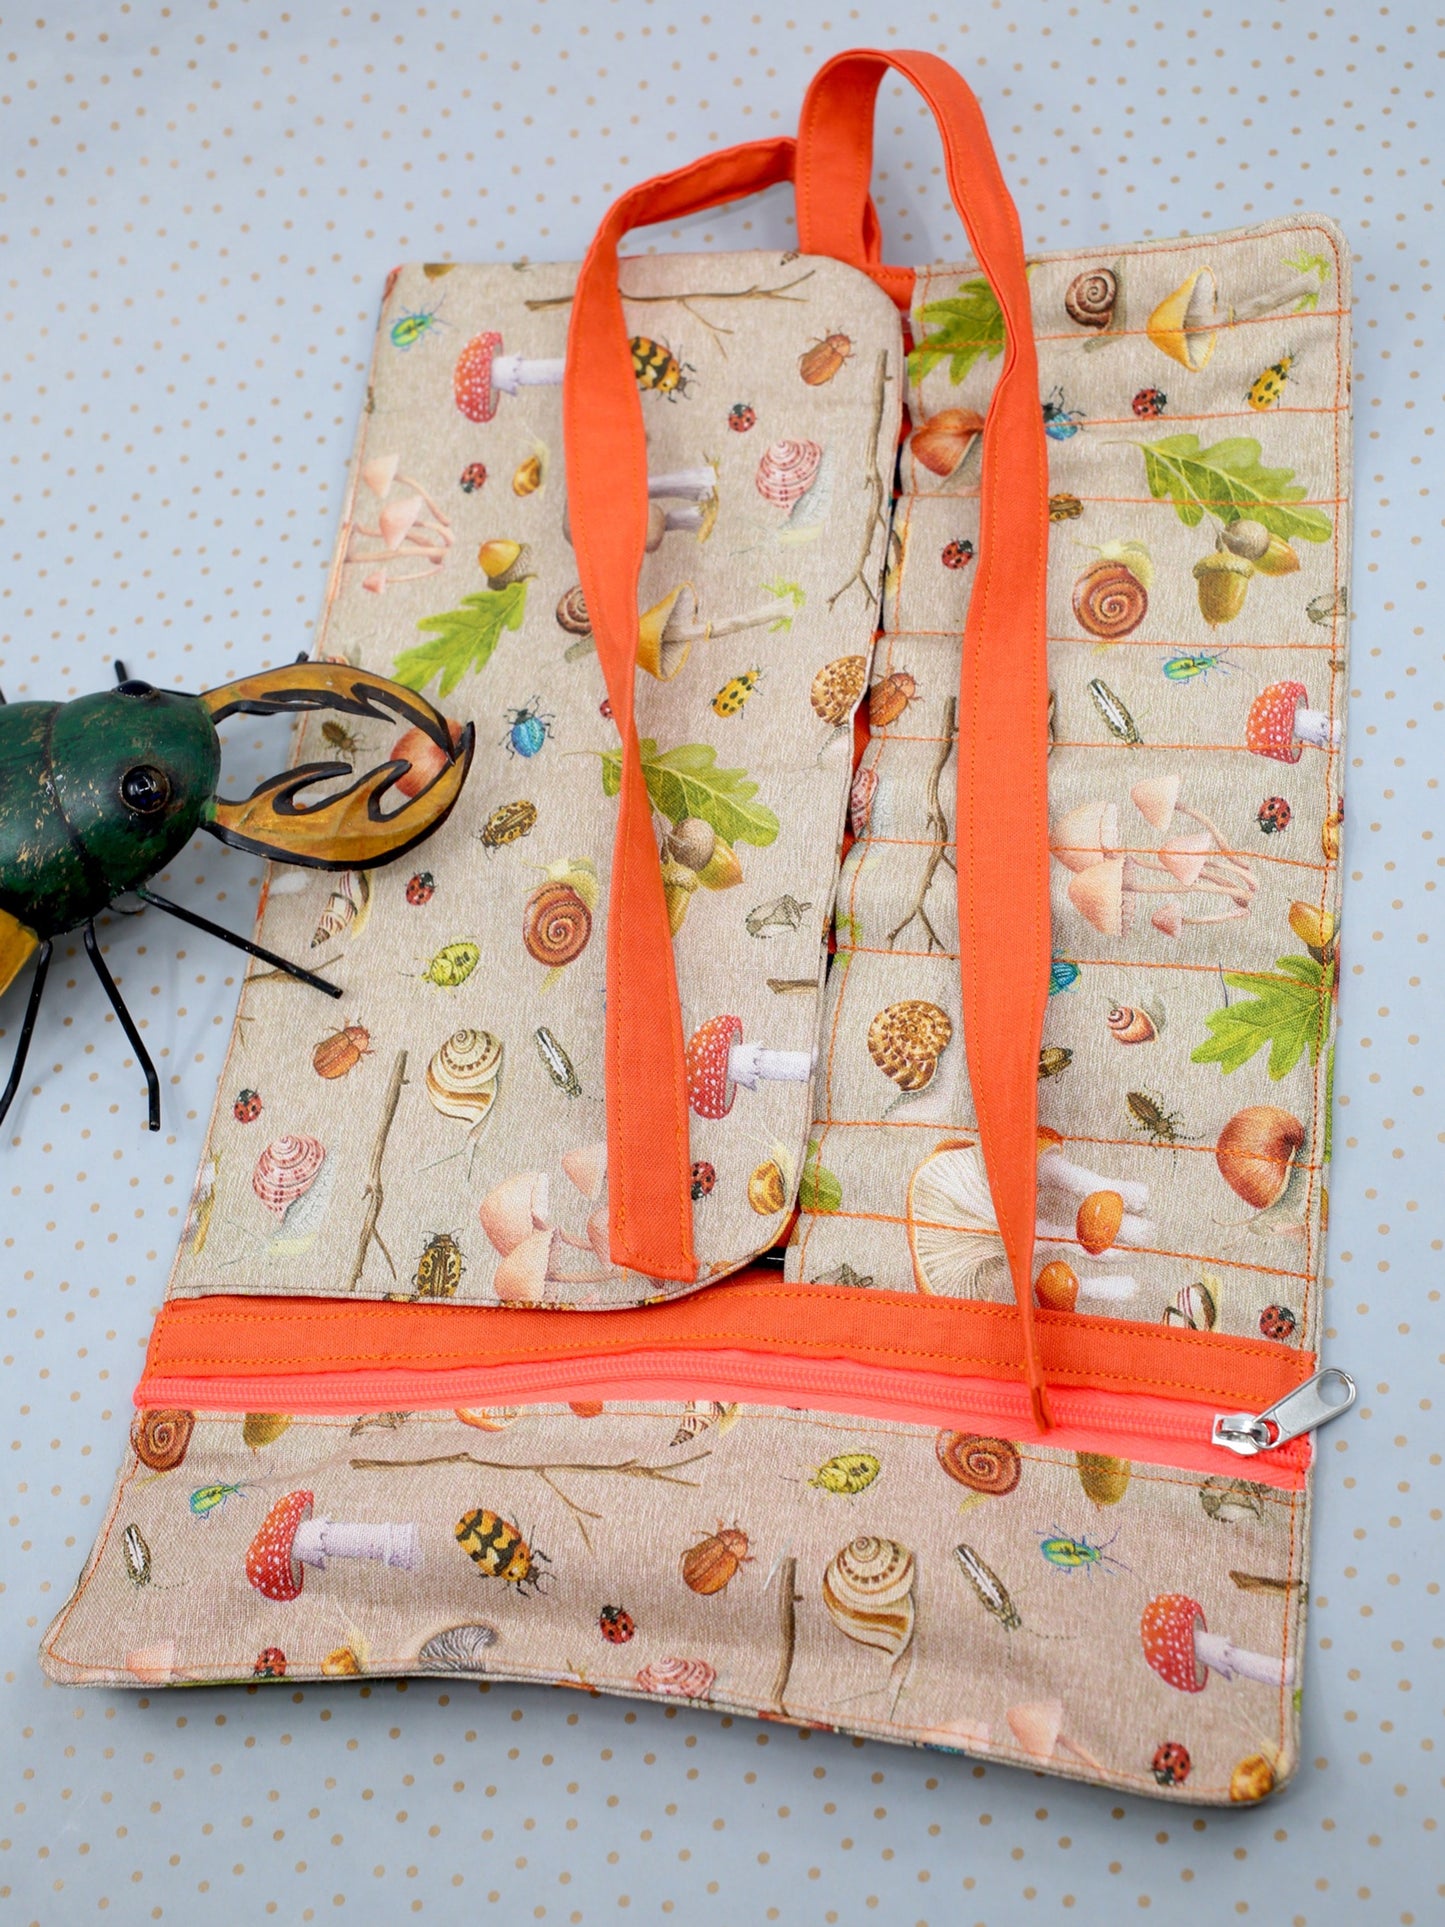 The indispensable entomological tool roll up -Fungi & Bugs